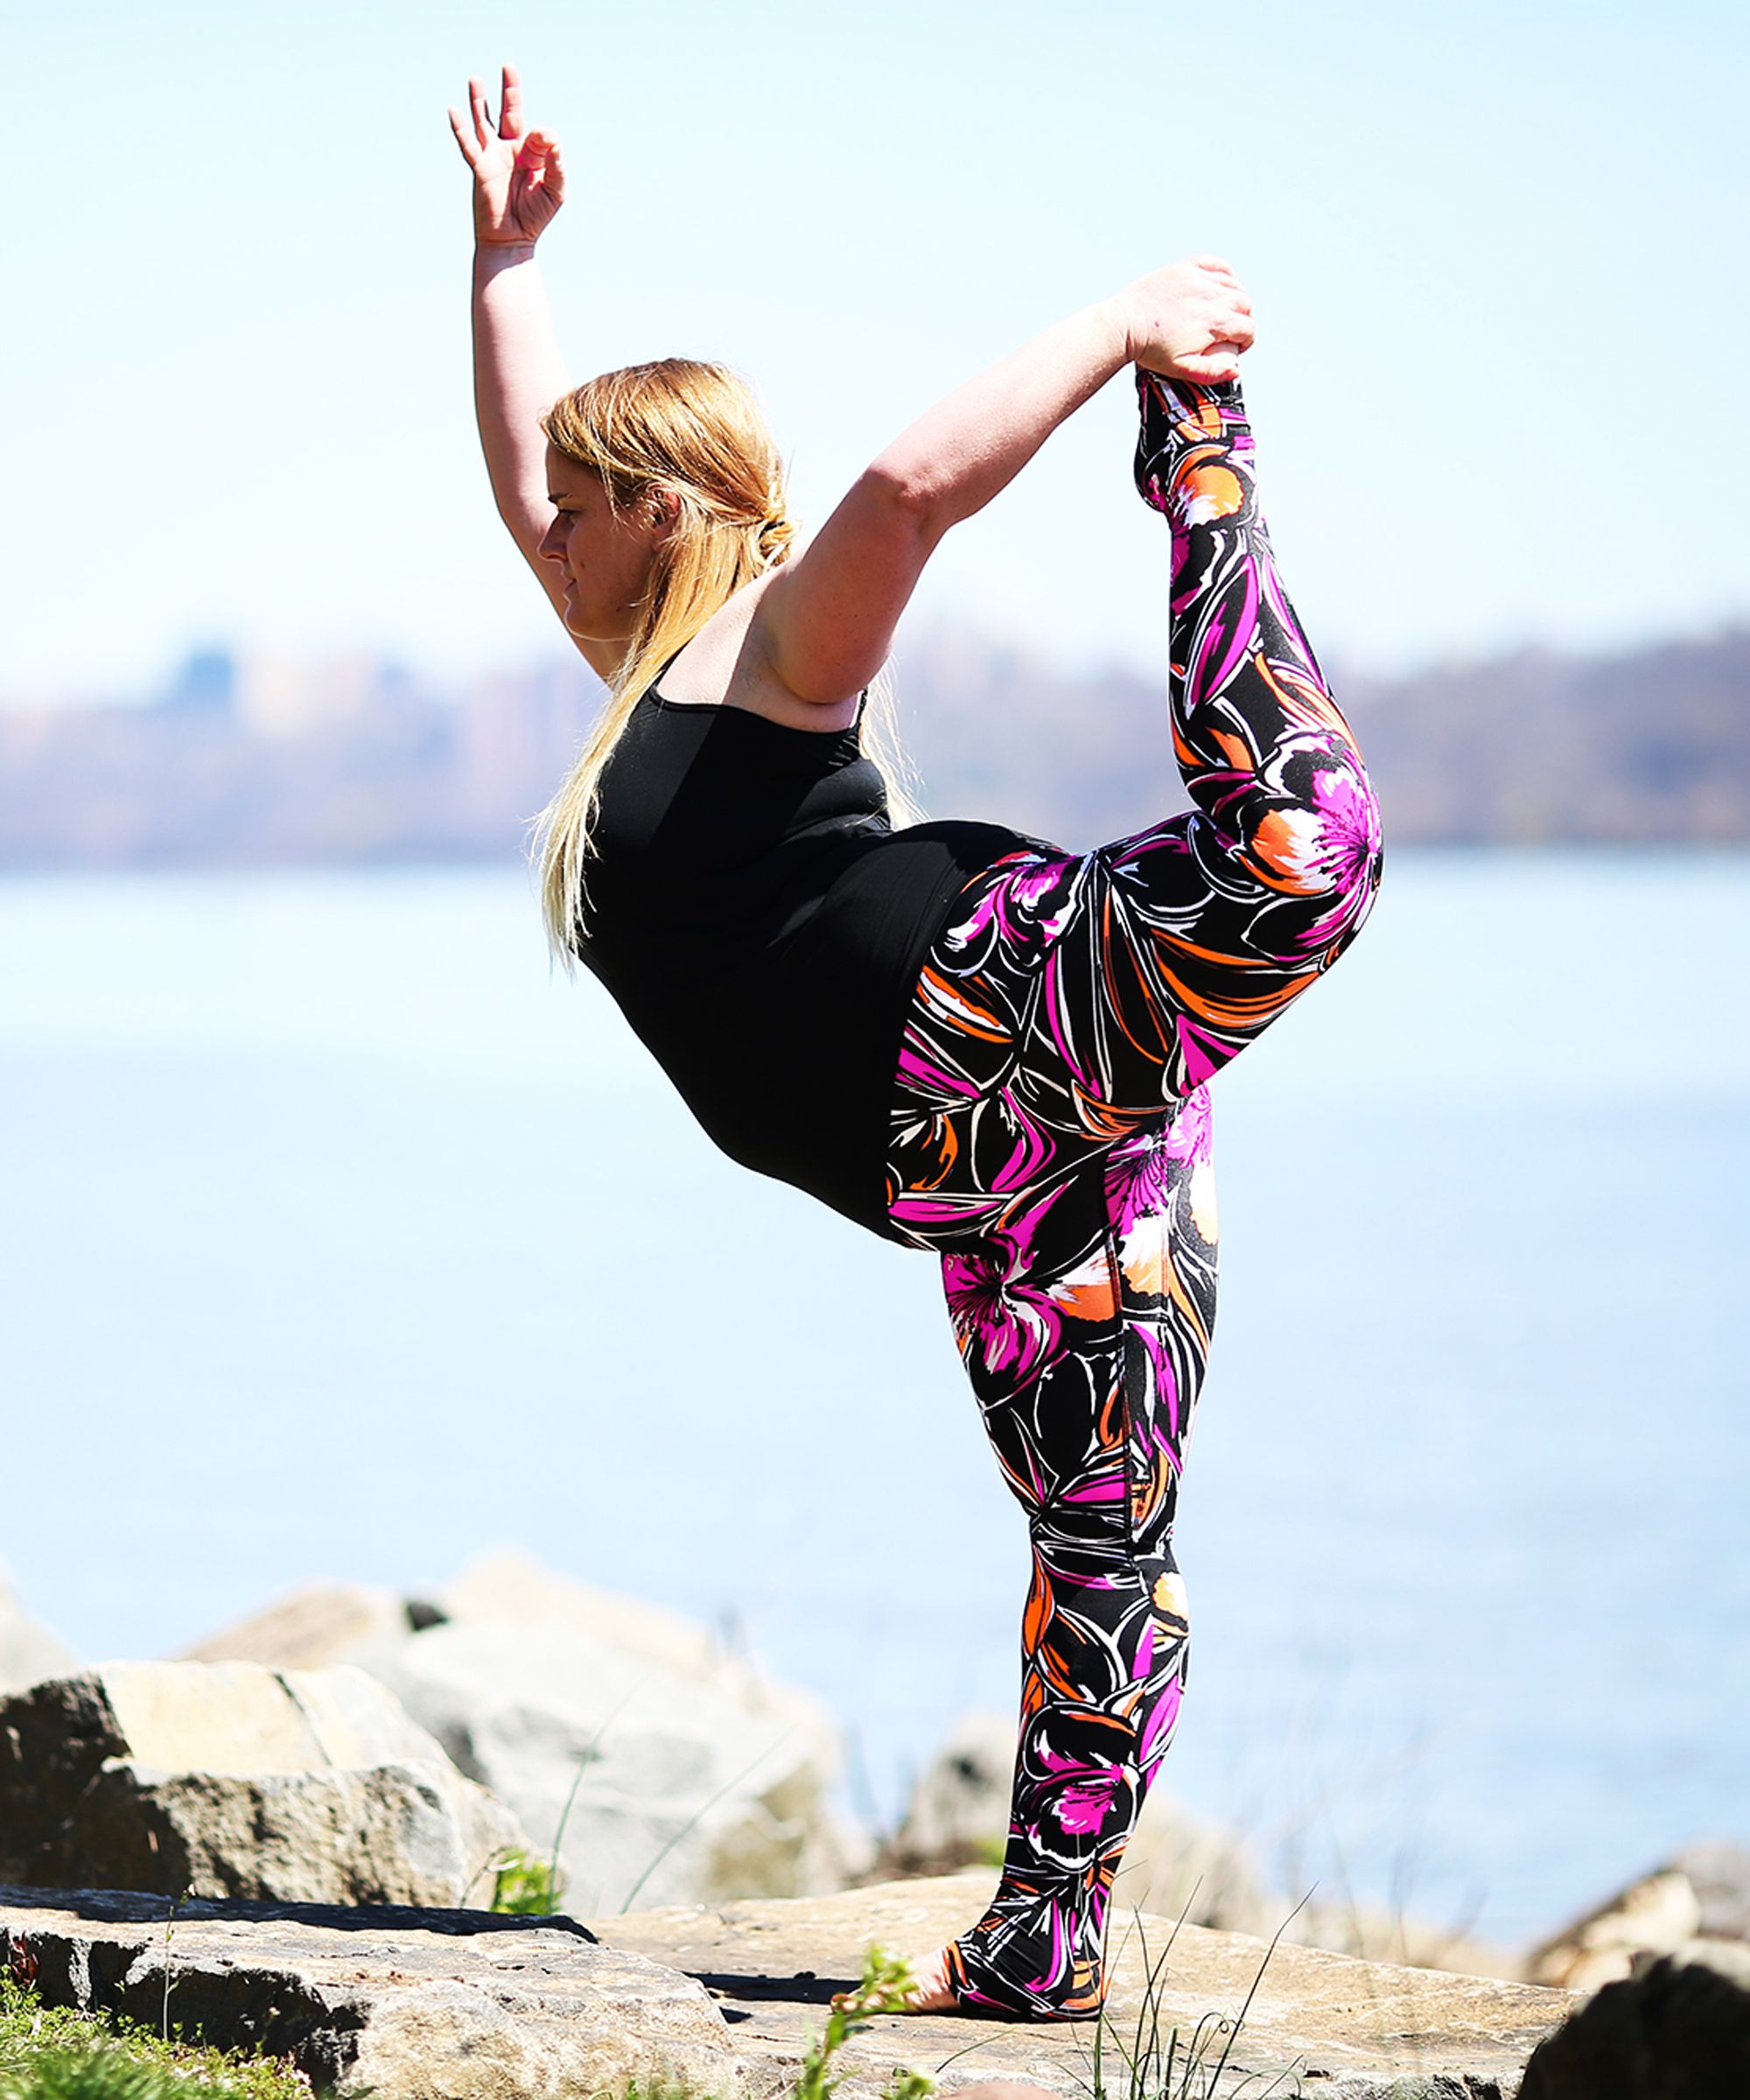 Superfit Hero - Size Inclusive High Performance Leggings by Micki